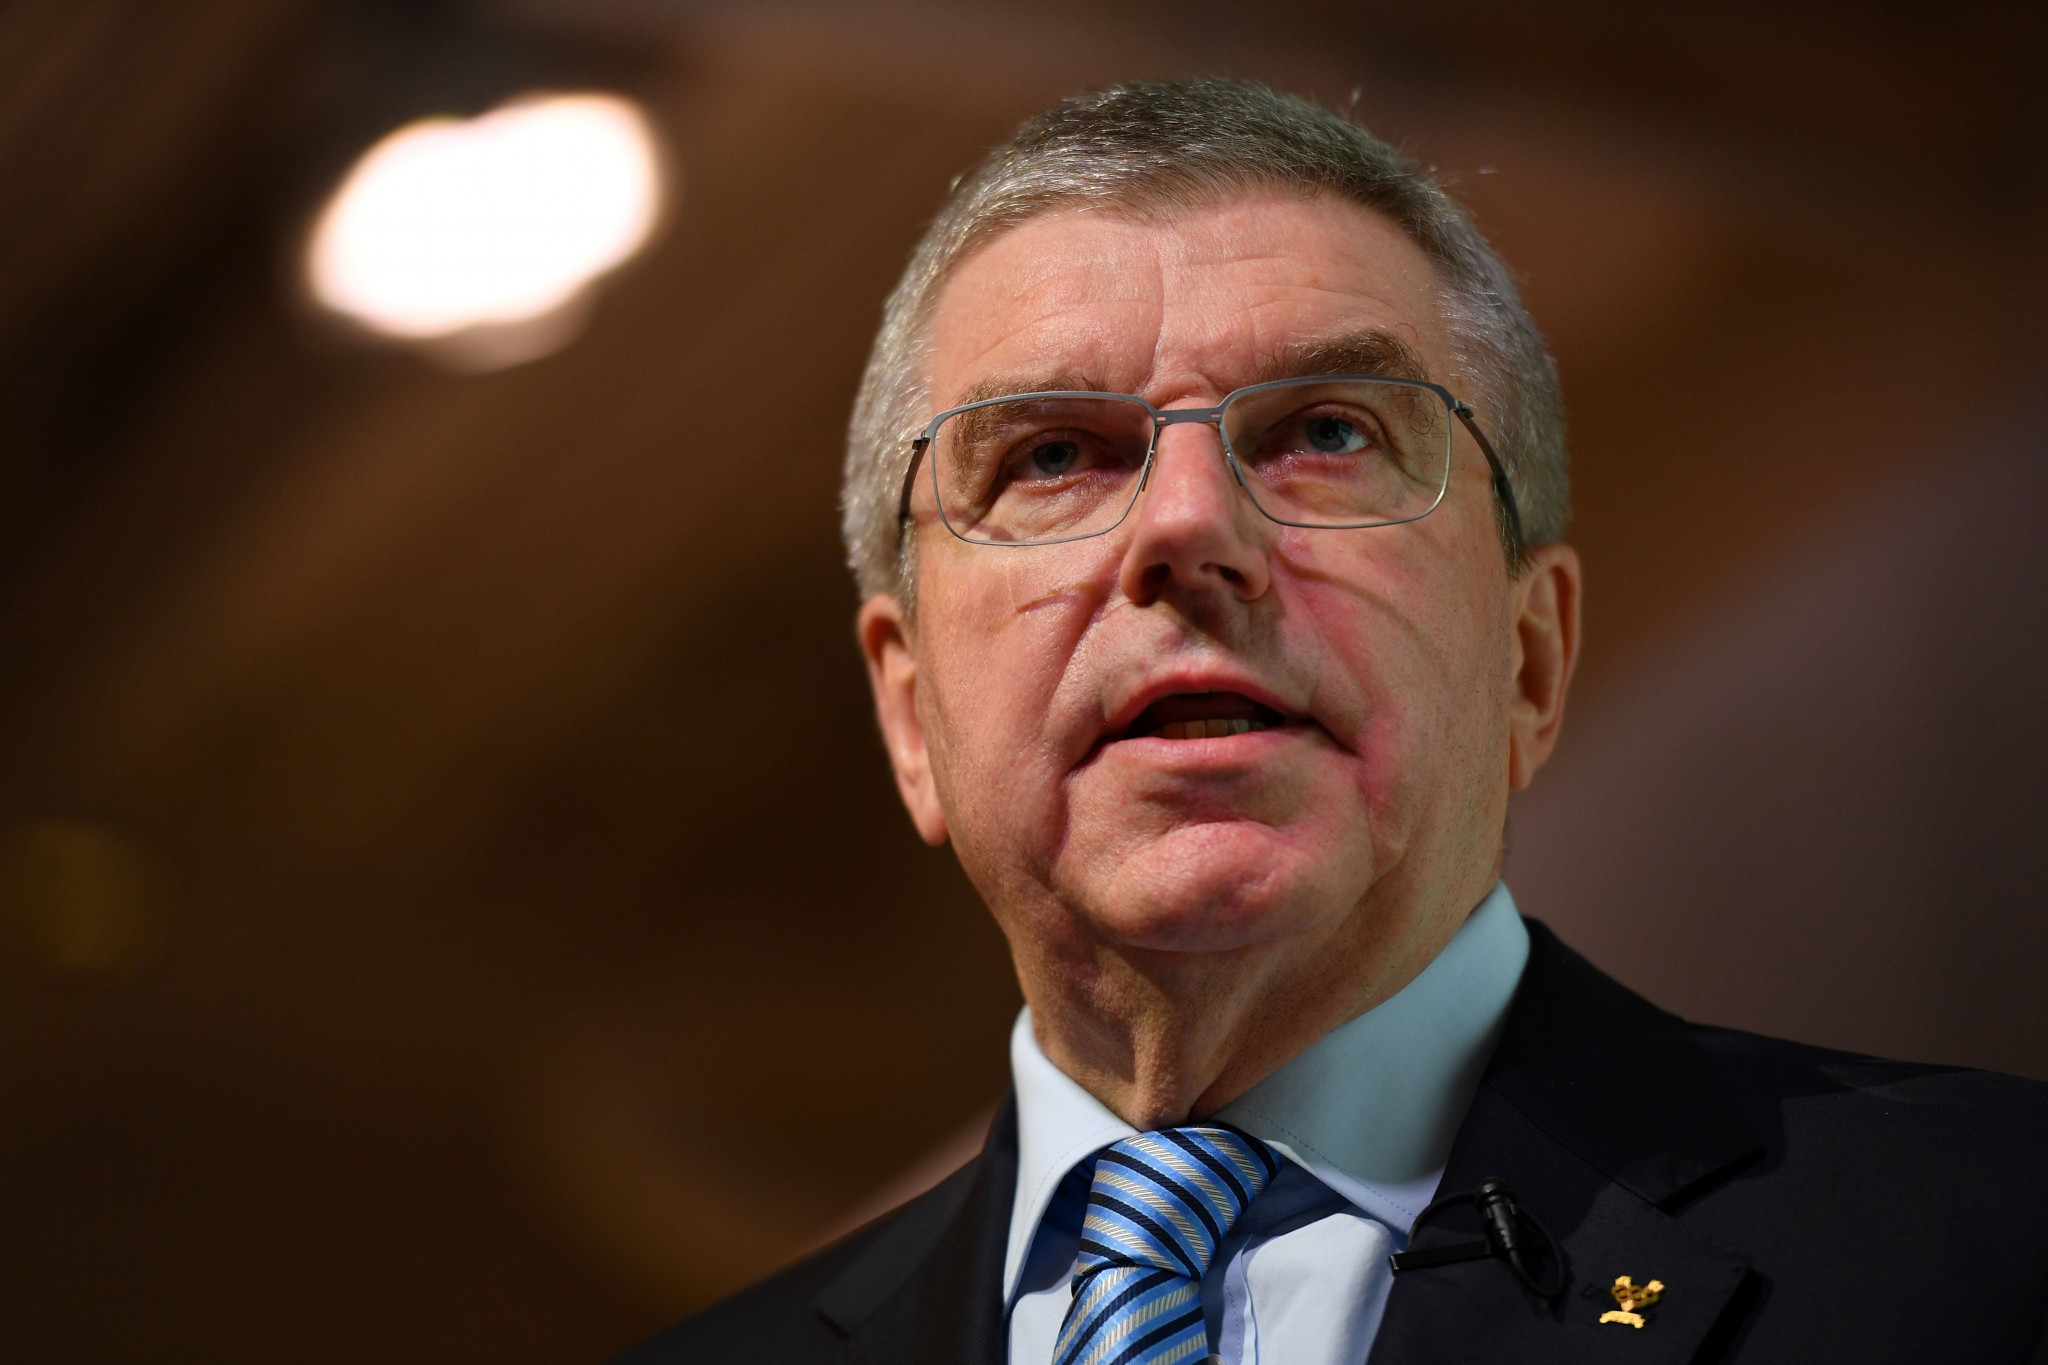 IOC President Thomas Bach is set to be among the speakers at the upcoming World Olympians Association General Assembly ©Getty Images